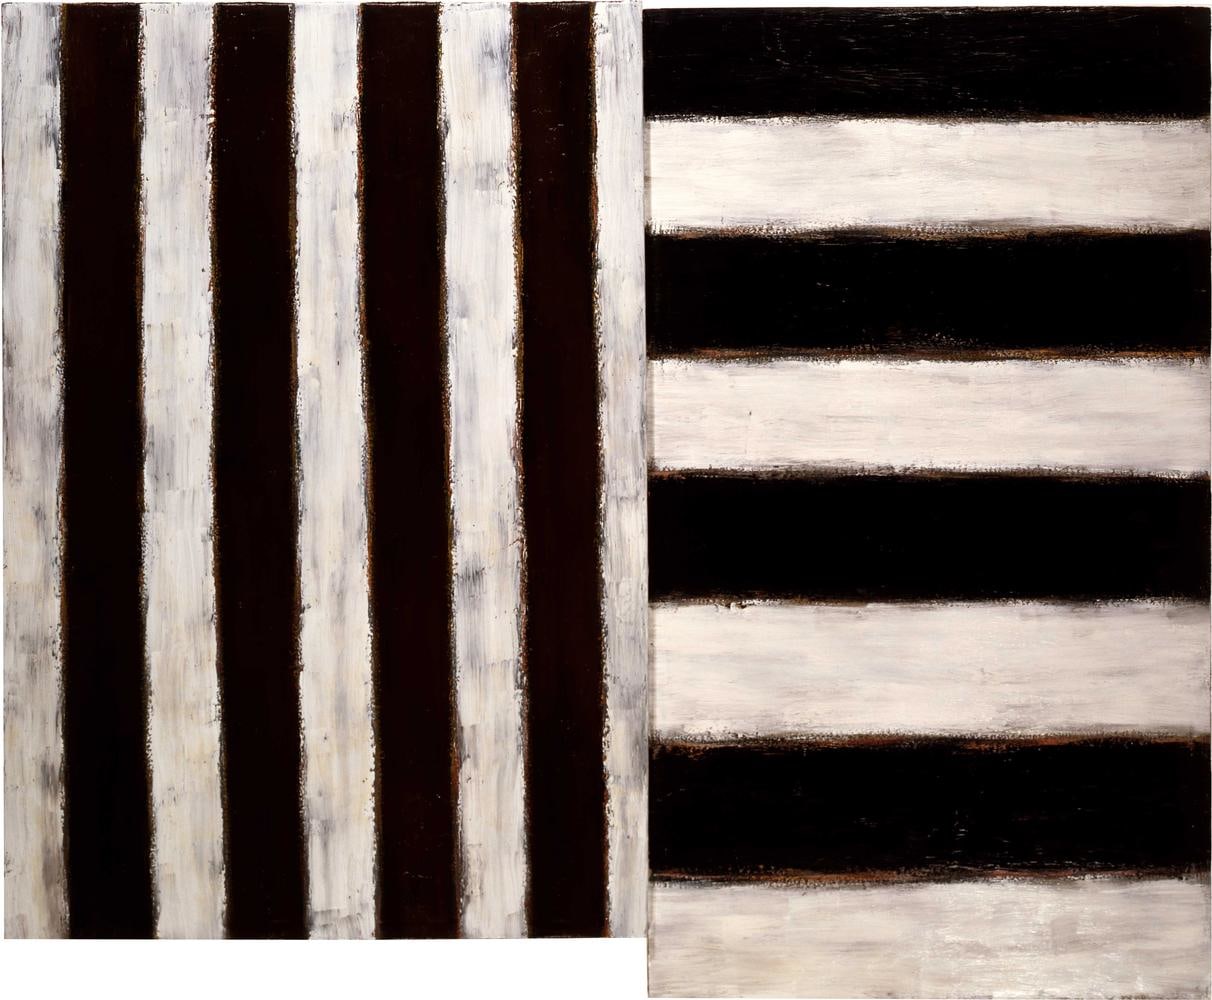 Sean Scully

Shelter Island

1982

oil on linen

45 x 54 inches (114.3 x 137.2 cm)